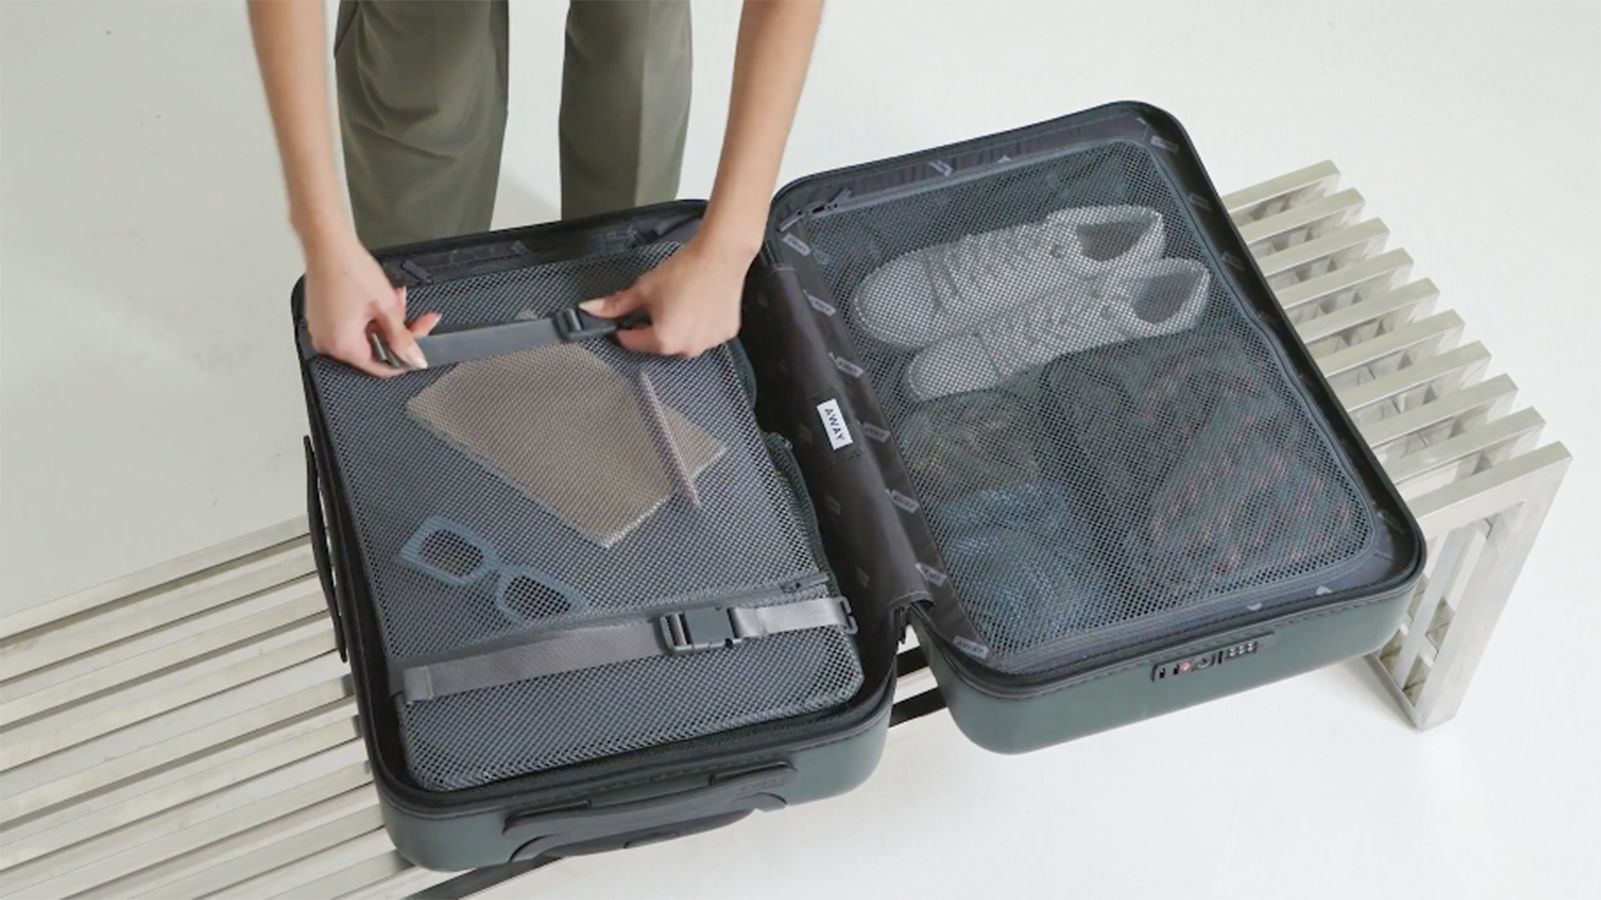 Heavy vs medium duty bags: Which are best for businesses and why?